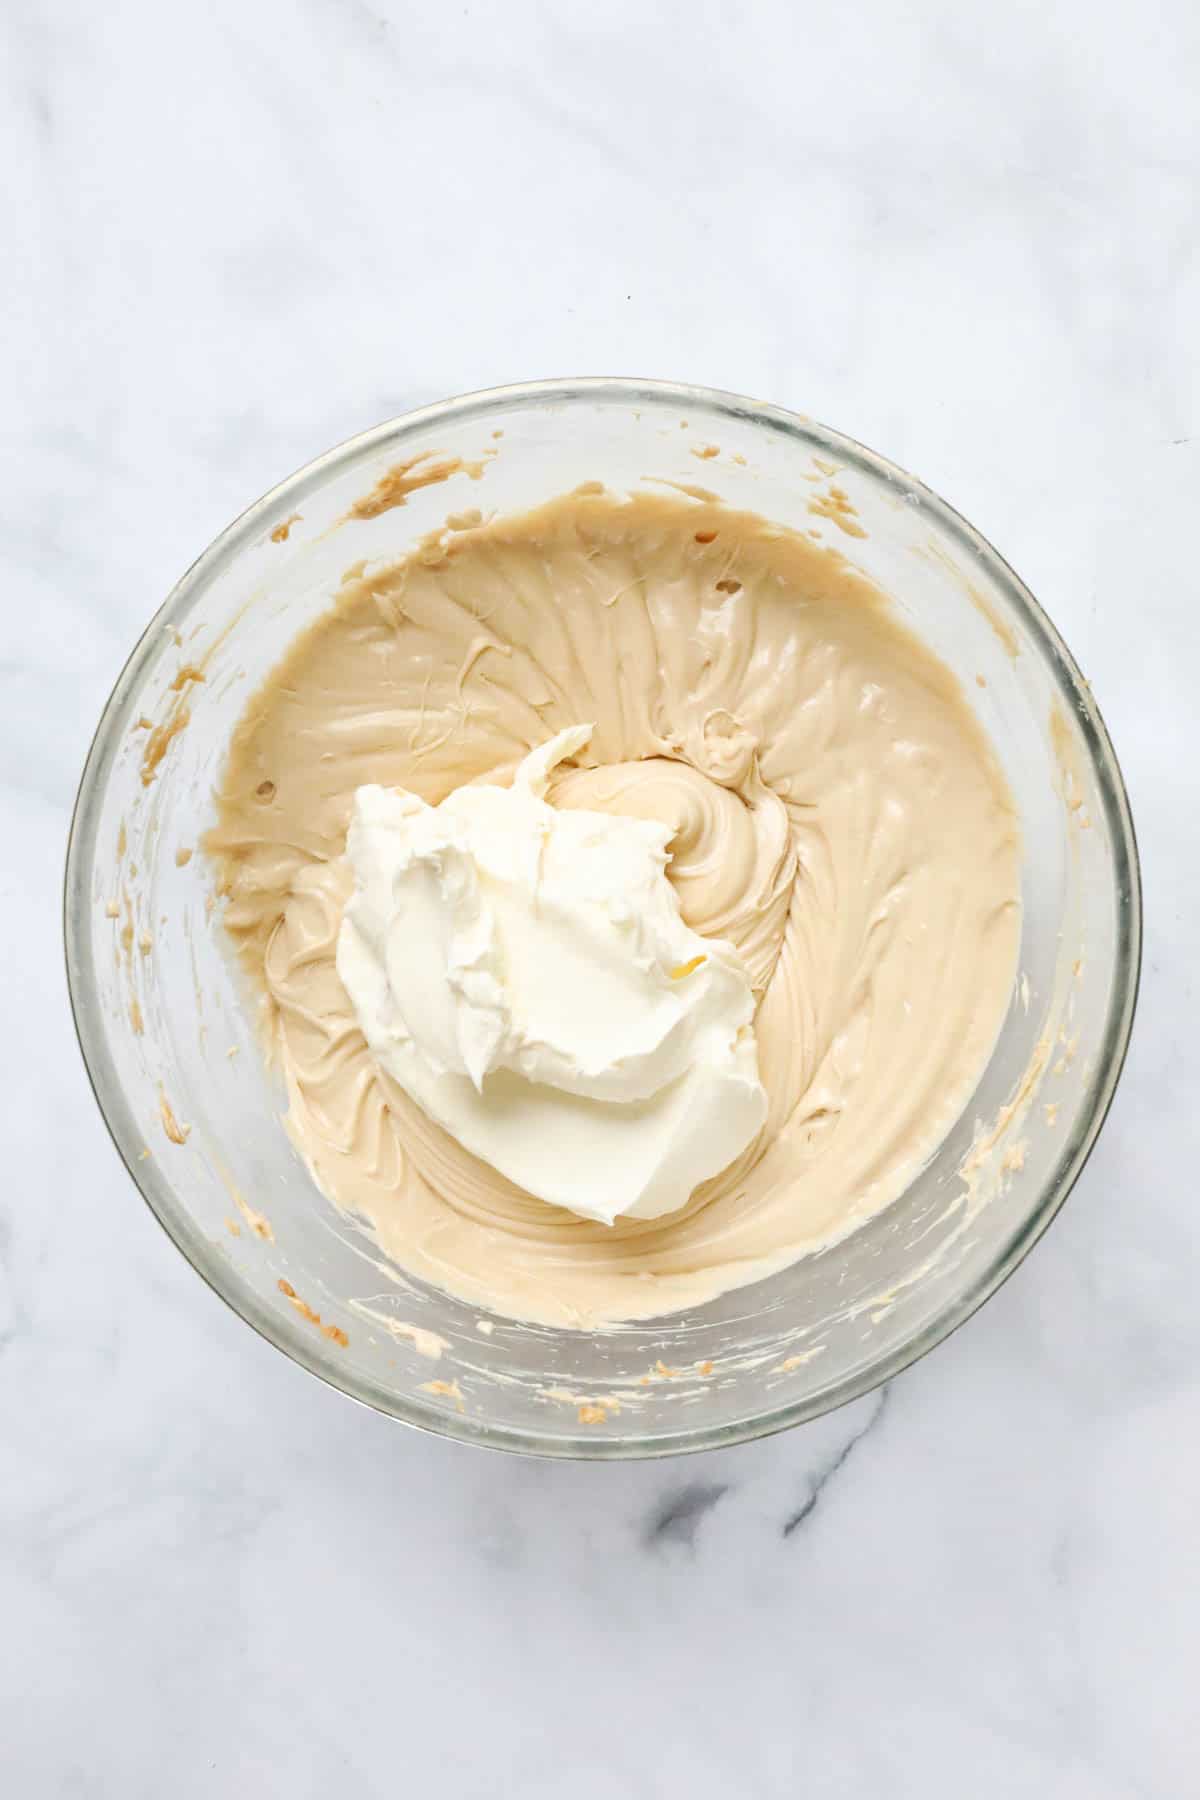 Whipped cream on top of cream cheese mixture.